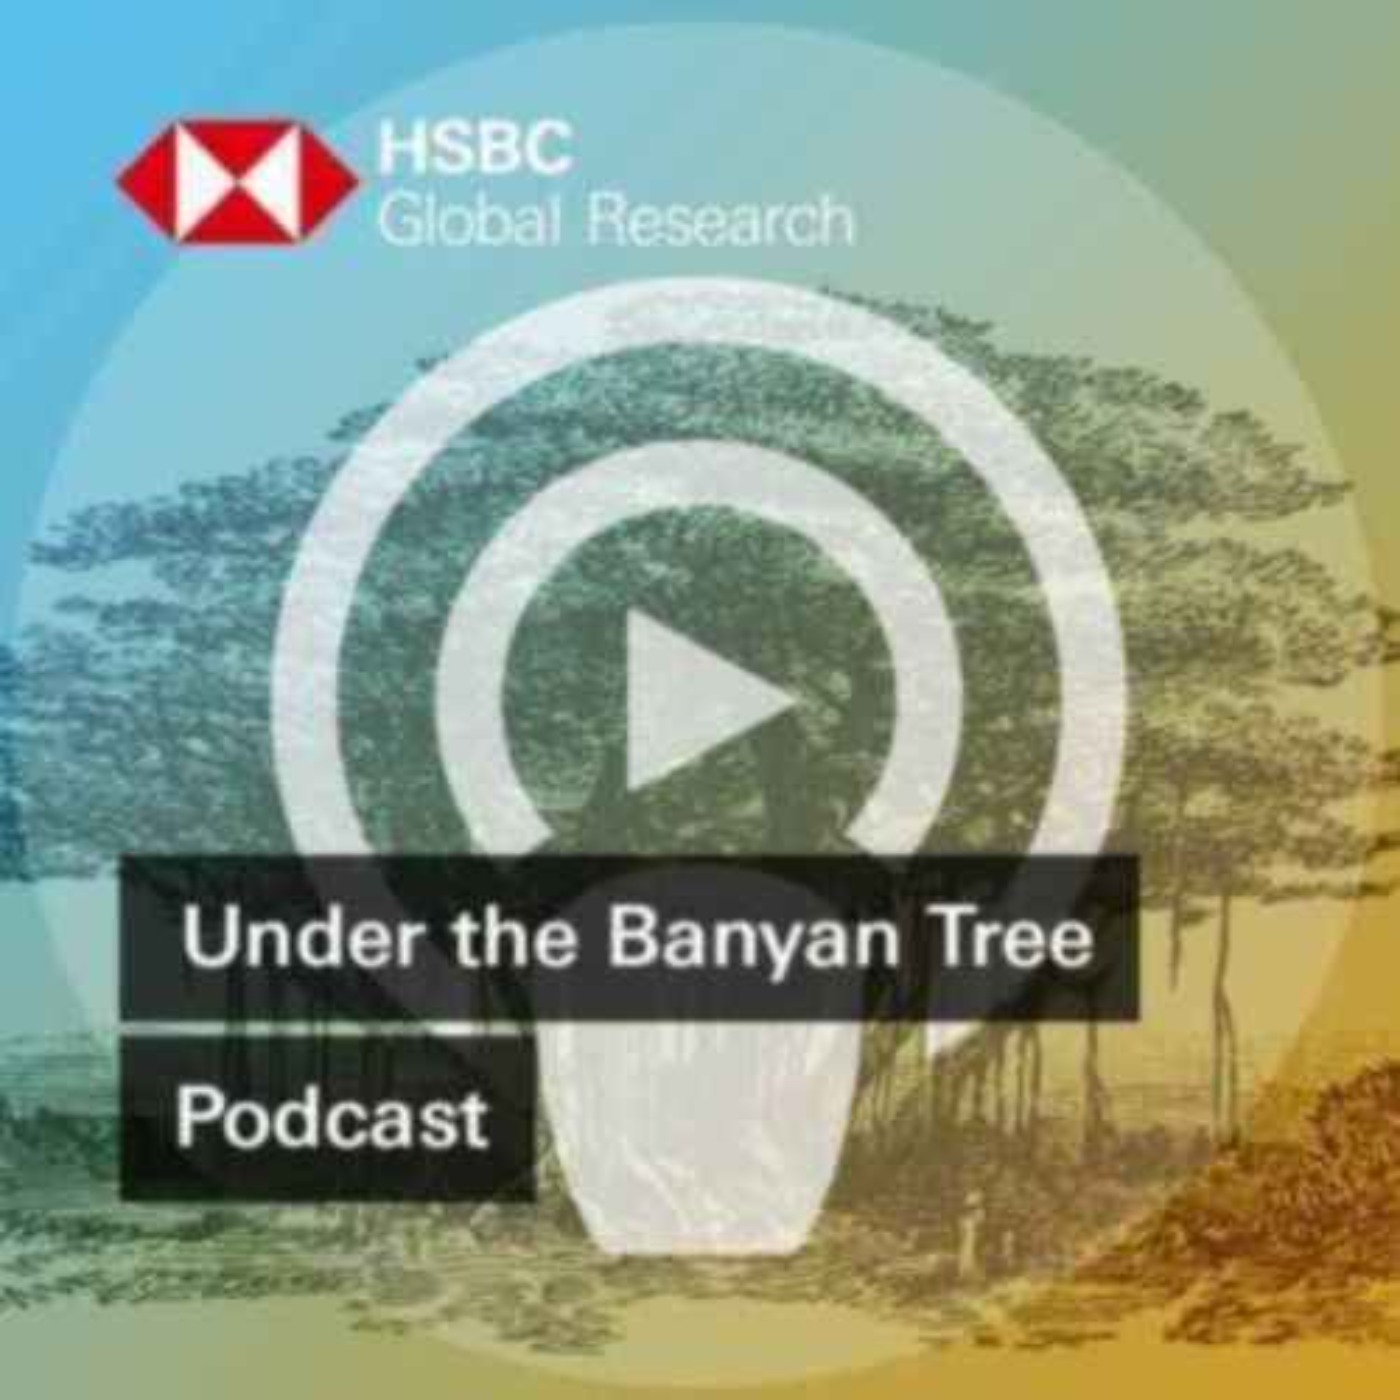 Under the Banyan Tree - Corporate governance and lessons from the Japanese eel